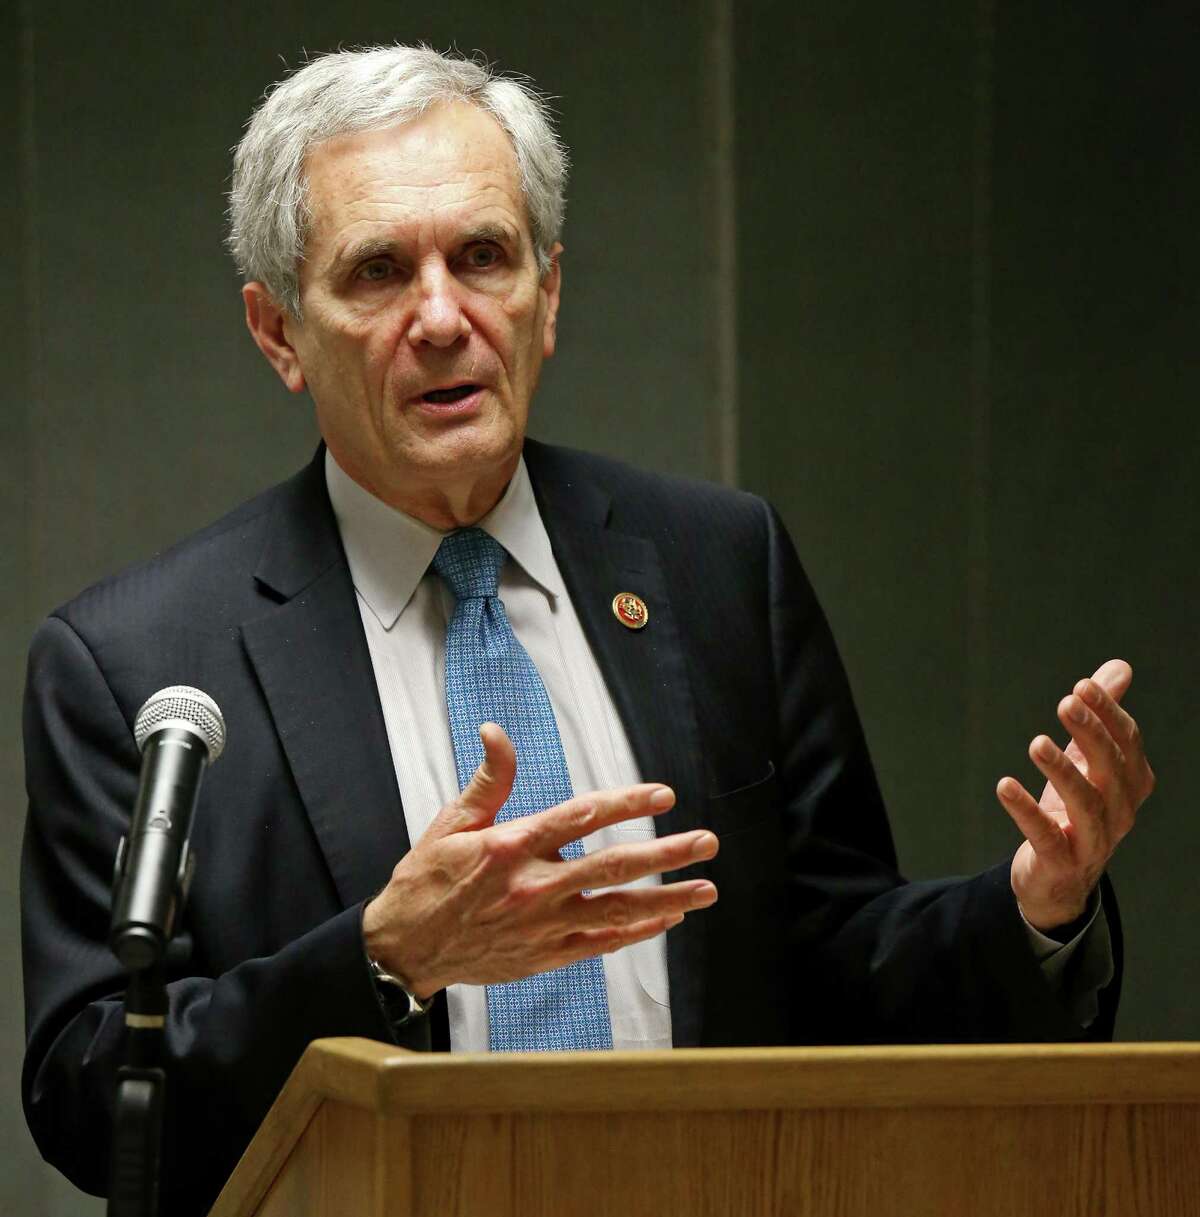 U.S. Rep. Lloyd Doggett, a Democrat, is hard-charging and hard-working. He has earned another term in the 35th Congressional District post.